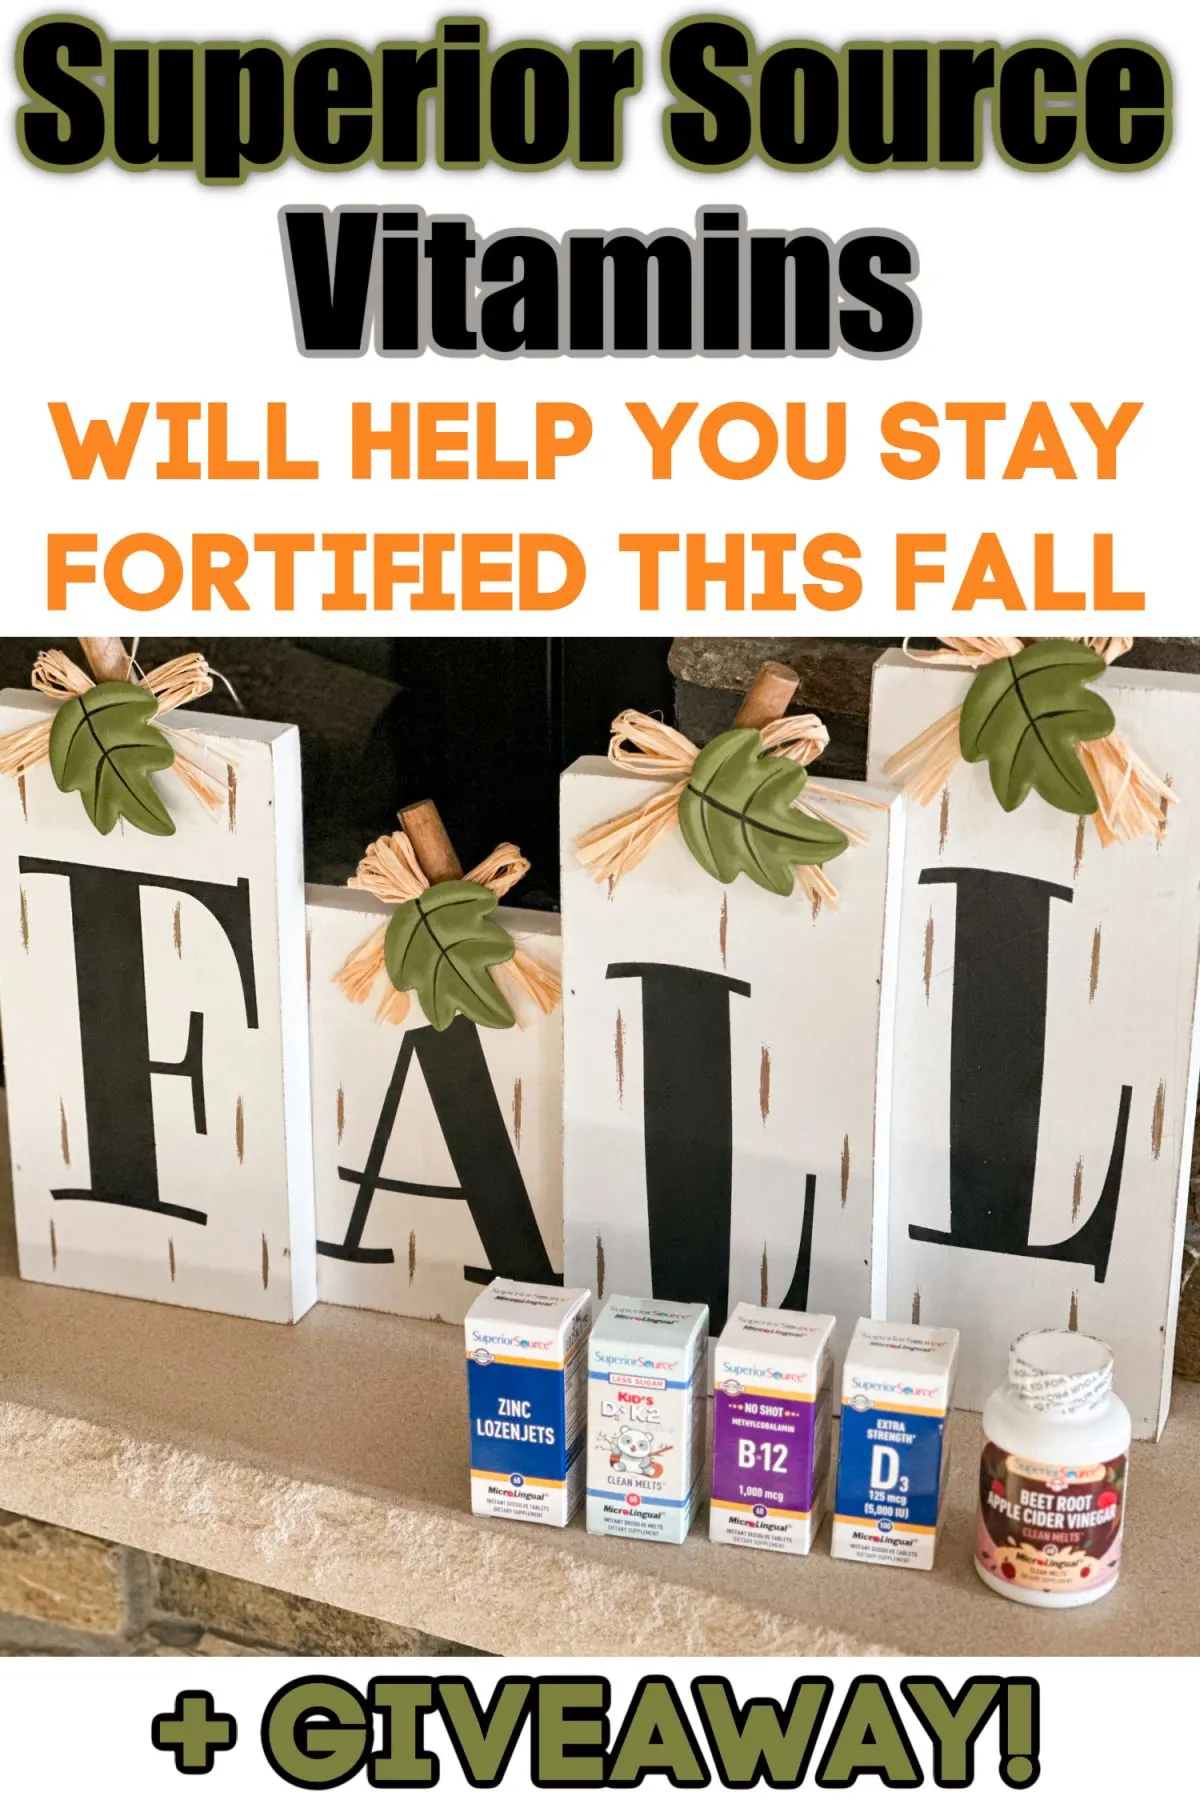 Superior Source Vitamins: Stay Fortified This Fall Season (+ Giveaway!)